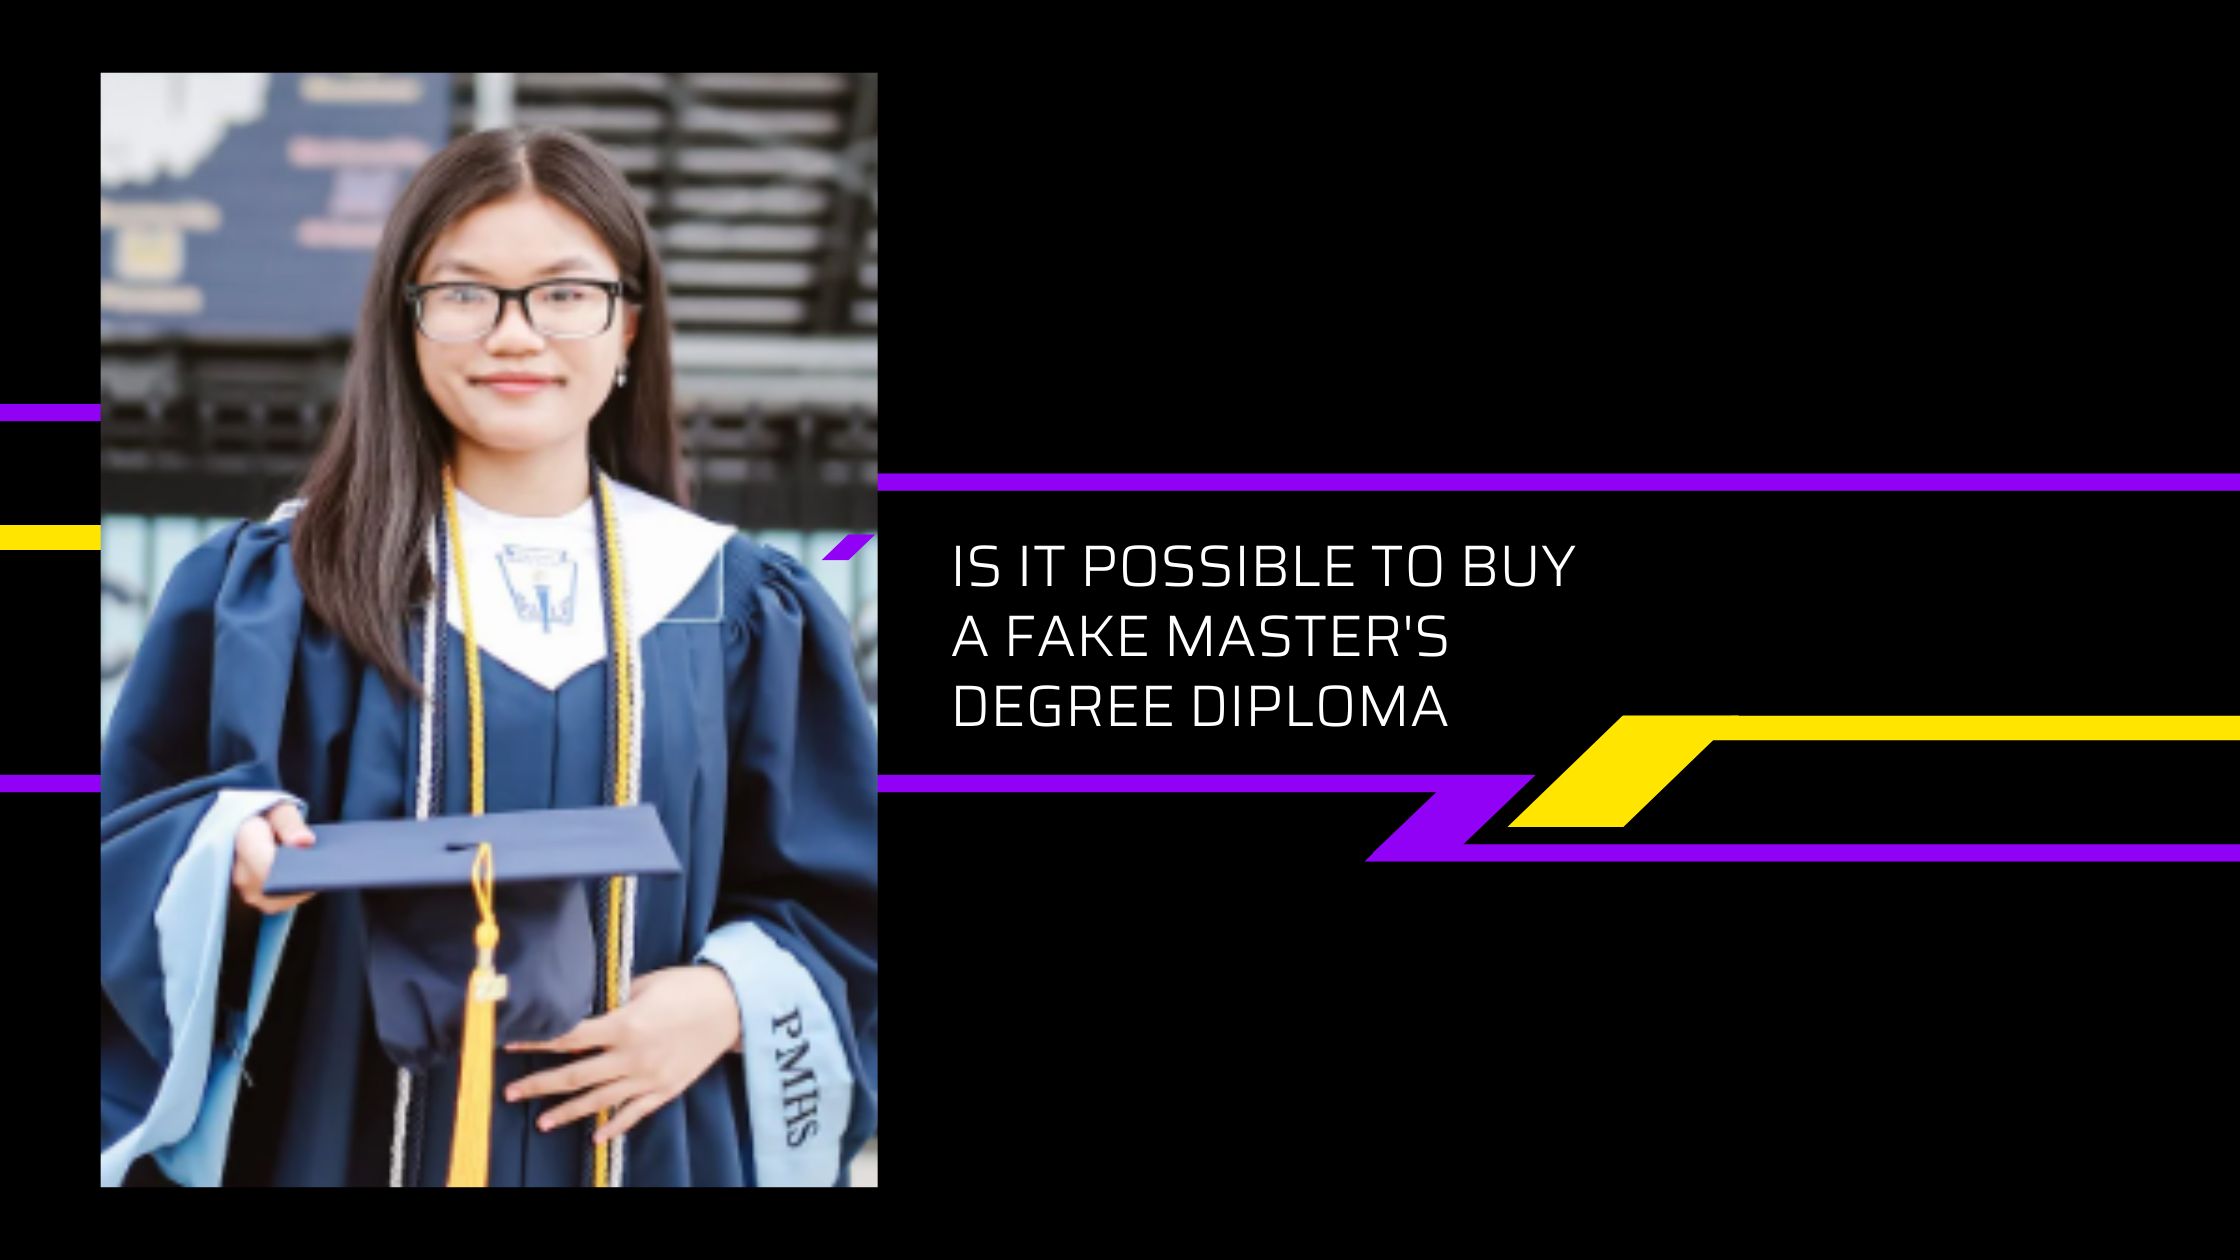 Is It Possible to Buy a Fake Master's Degree Diploma